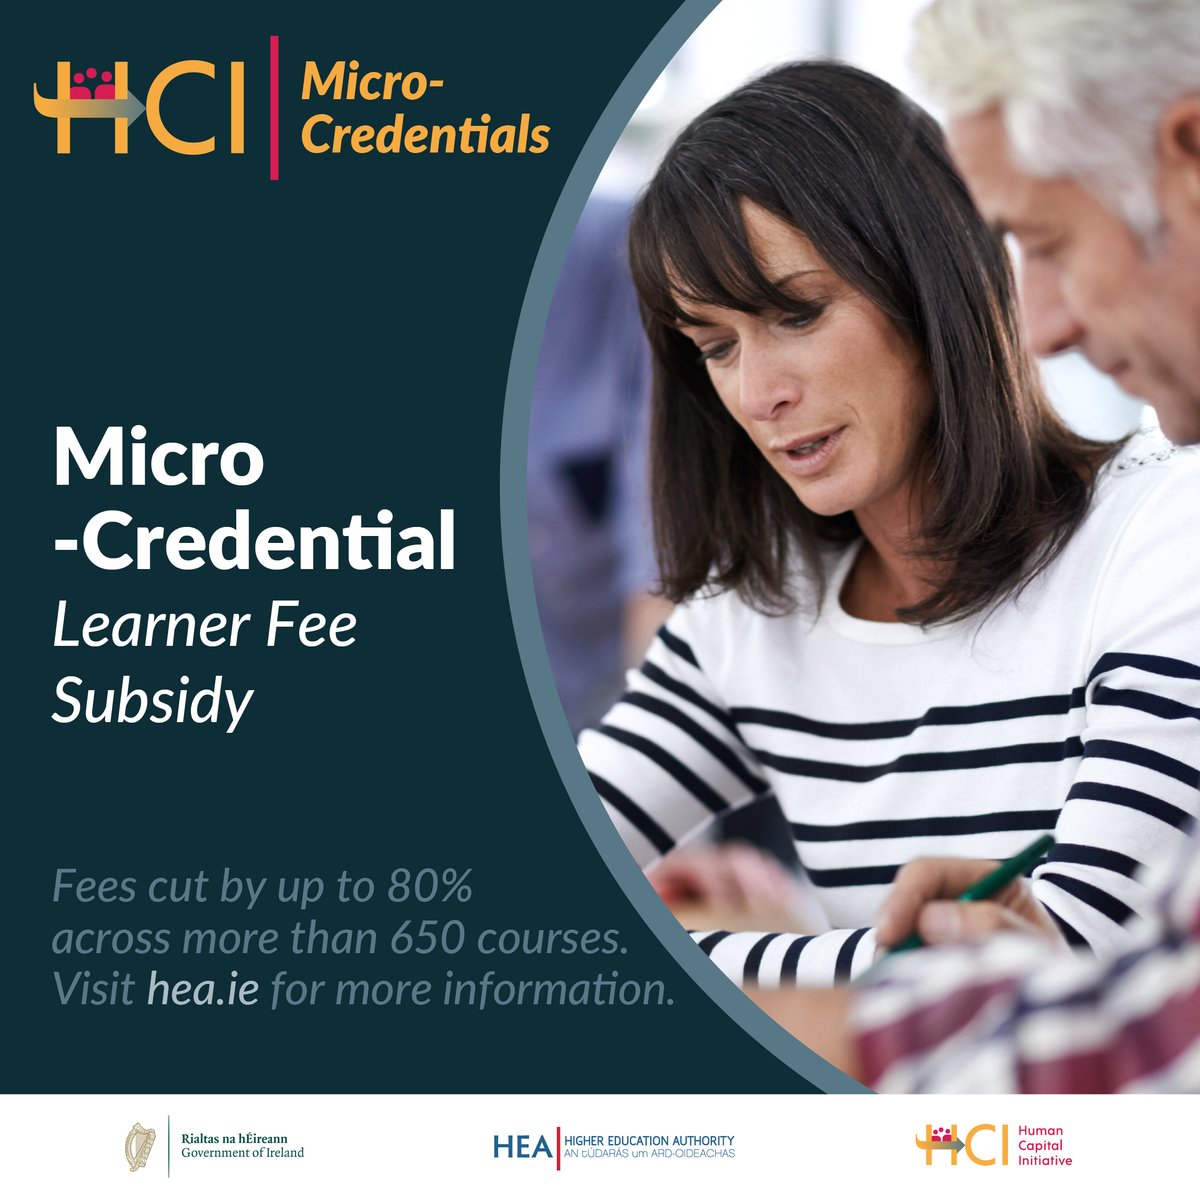 Over 14,000 places across 654 courses are now available with the Micro-Credentials Learner Fee Subsidy. From engineering to health and business to science, explore diverse industries at 15 higher education institutions nationwide. Learn more at: hea.ie